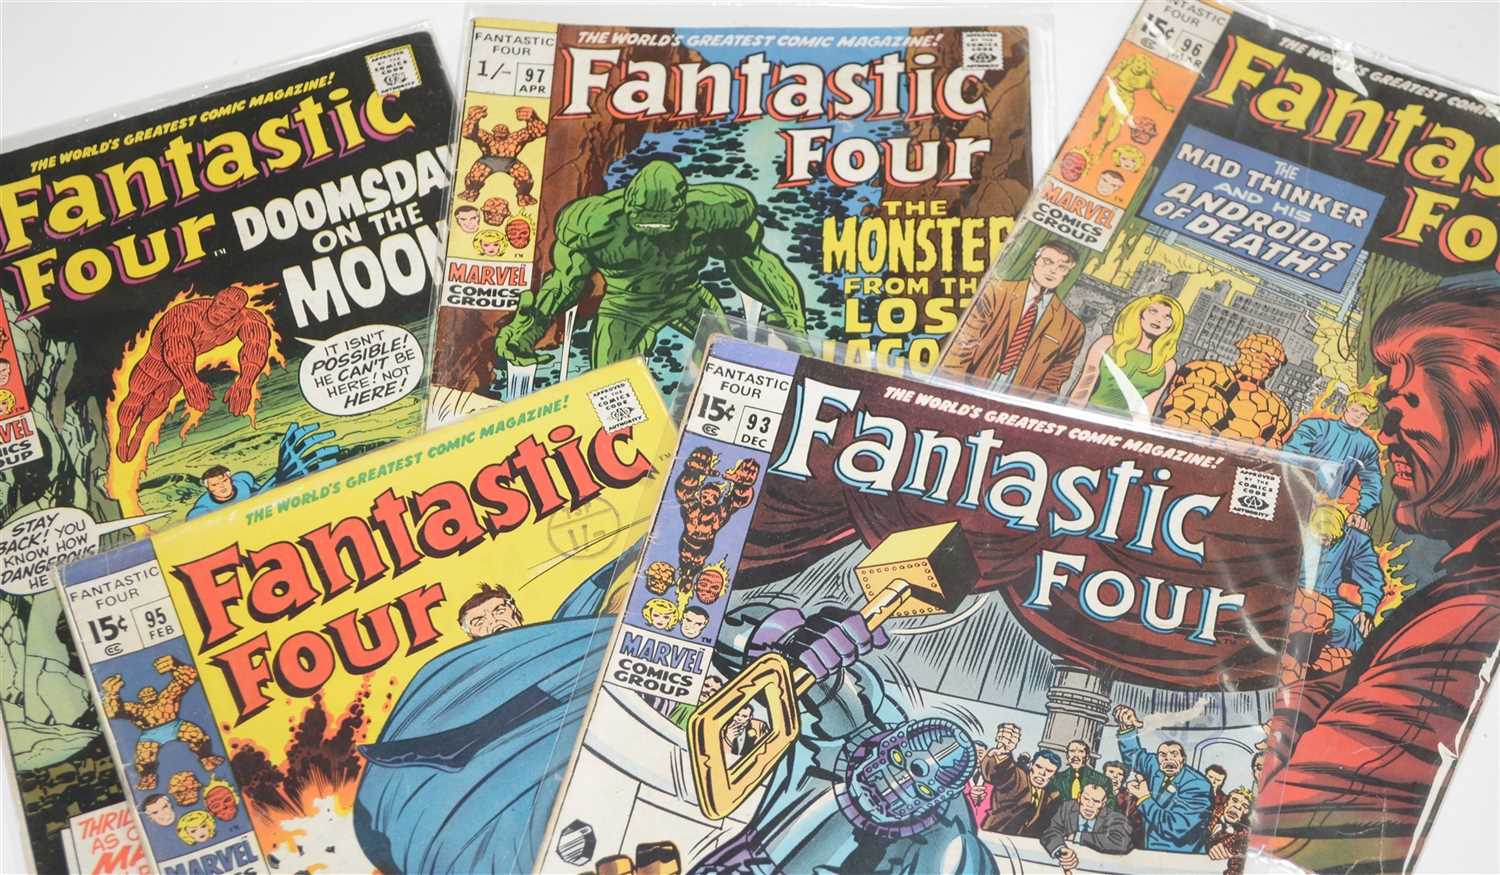 Lot 1031 - Fantastic Four No's. 93, 95, 96, 97, 98, 99, 100, 101, 105, 111, 113, 114 and 115